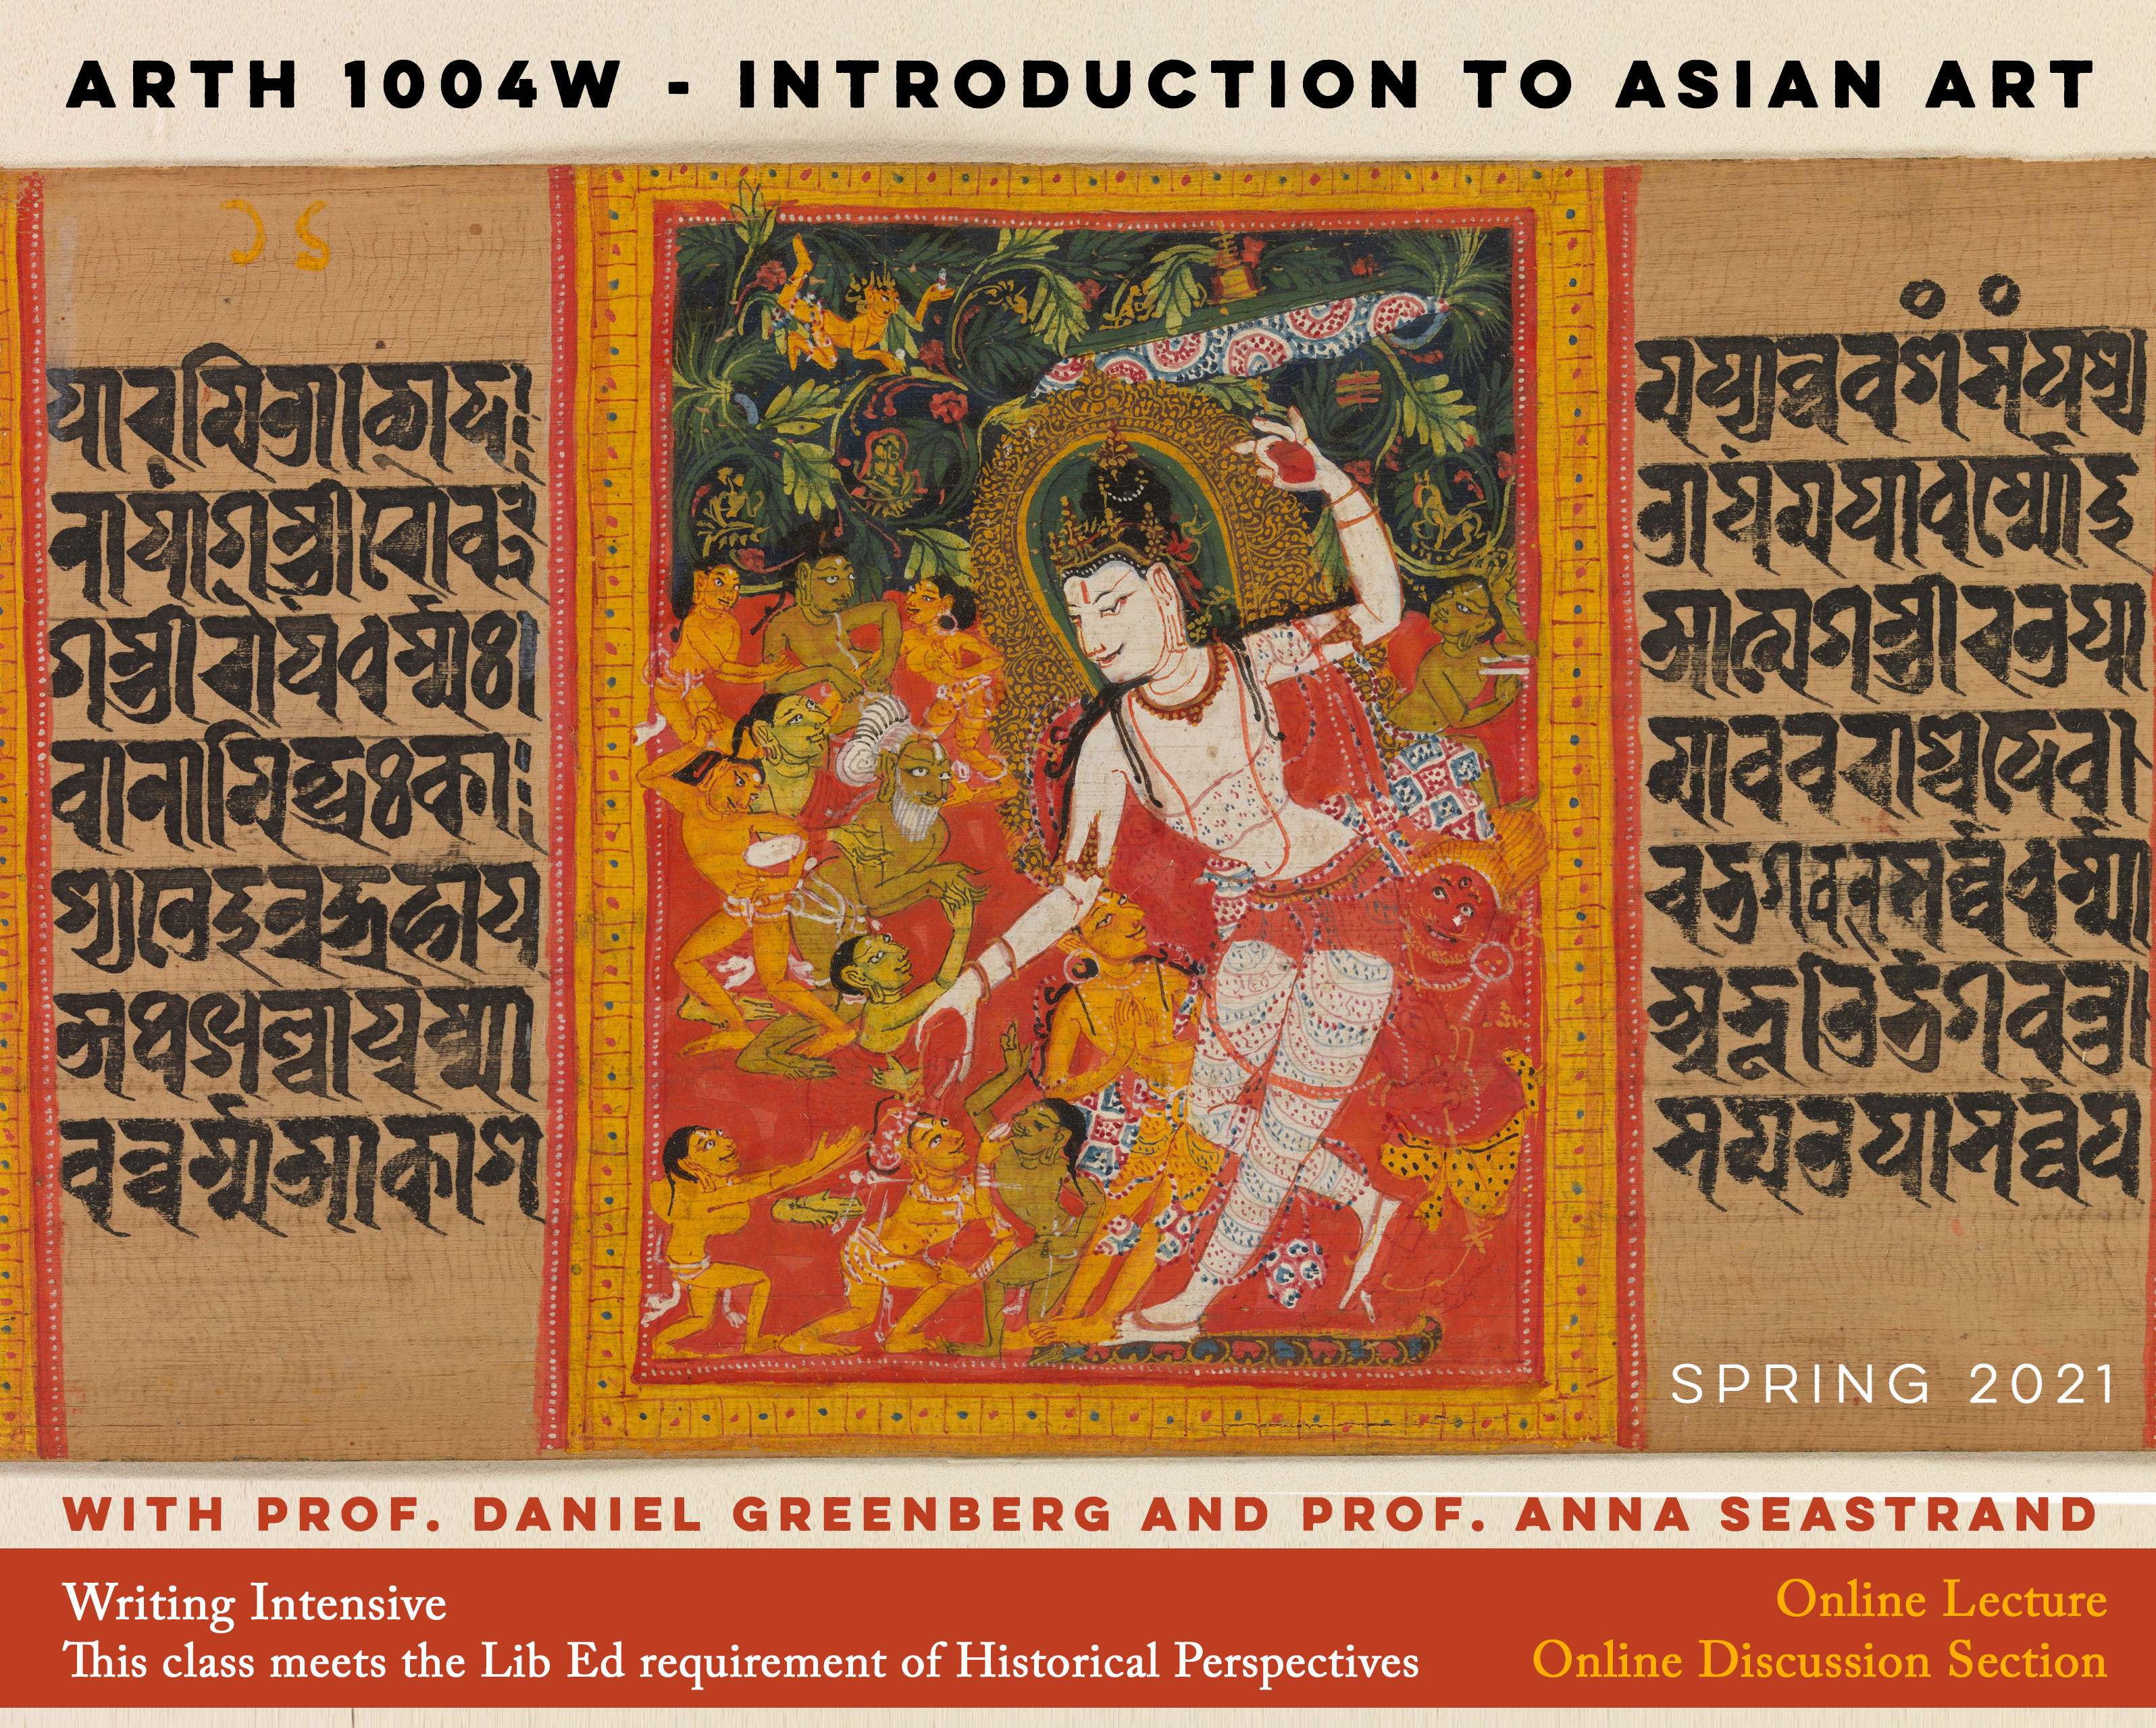 Course poster for ARTH 1004W Intro to Asian Art with Profs. Anna Seastrand and Daniel Greenberg. The course is writing intensive and meets the Lib Ed requirement of Historical Perspectives. Online lecture and discussion section. Spring 2021.